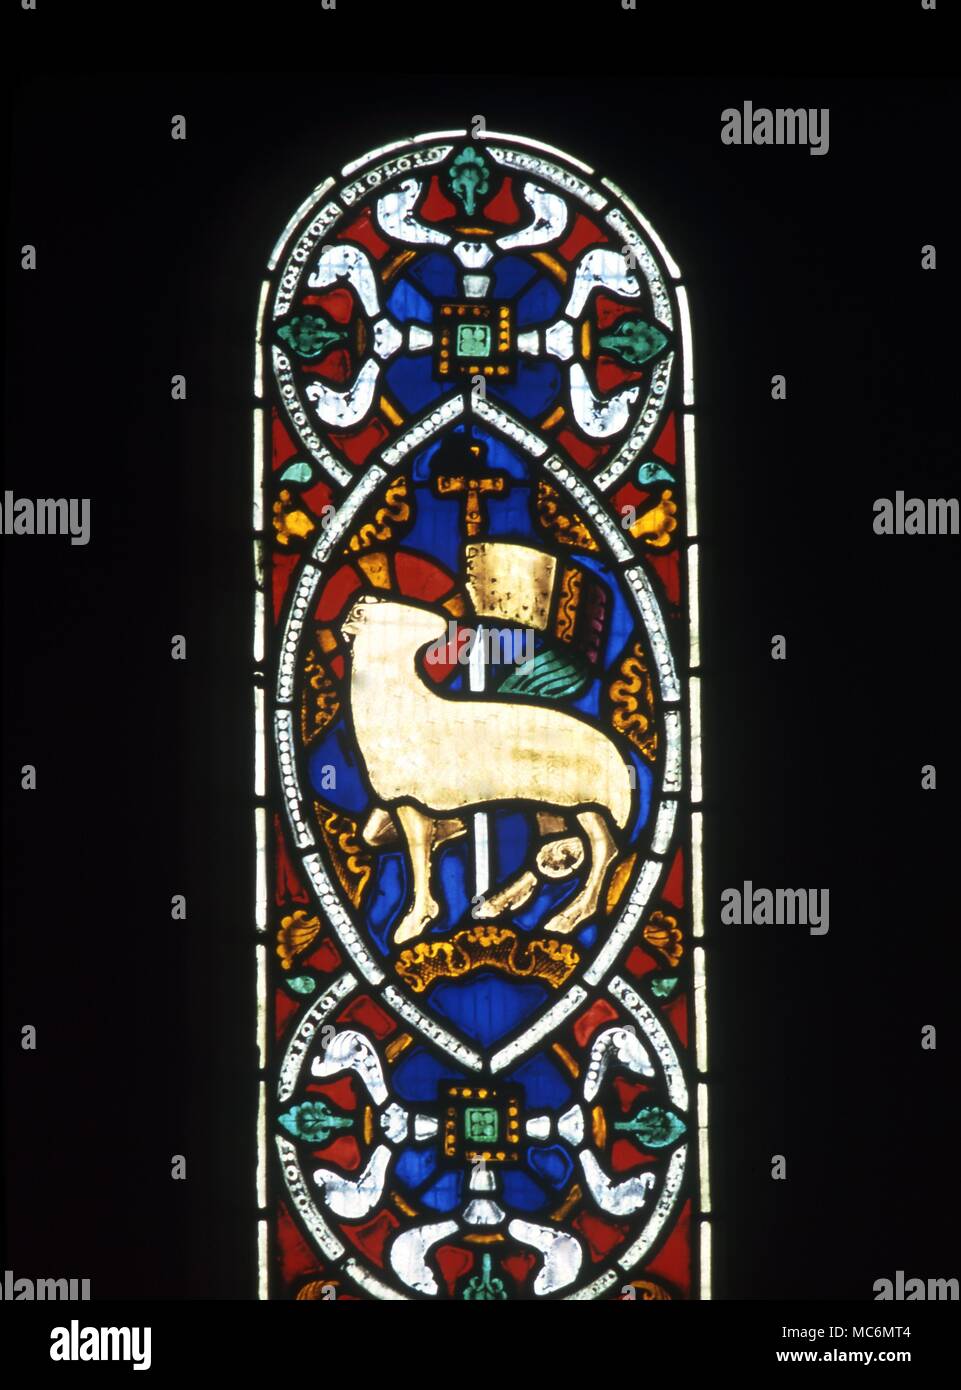 The Lamb of God in a Vesica Piscis. Stained glass window in Kilpeck church, near Hereford. Symbols - Vesica Piscis. The lamb of God in a Vesica Piscis. Stained glass window in Kilpeck church, near Hereford. Stock Photo